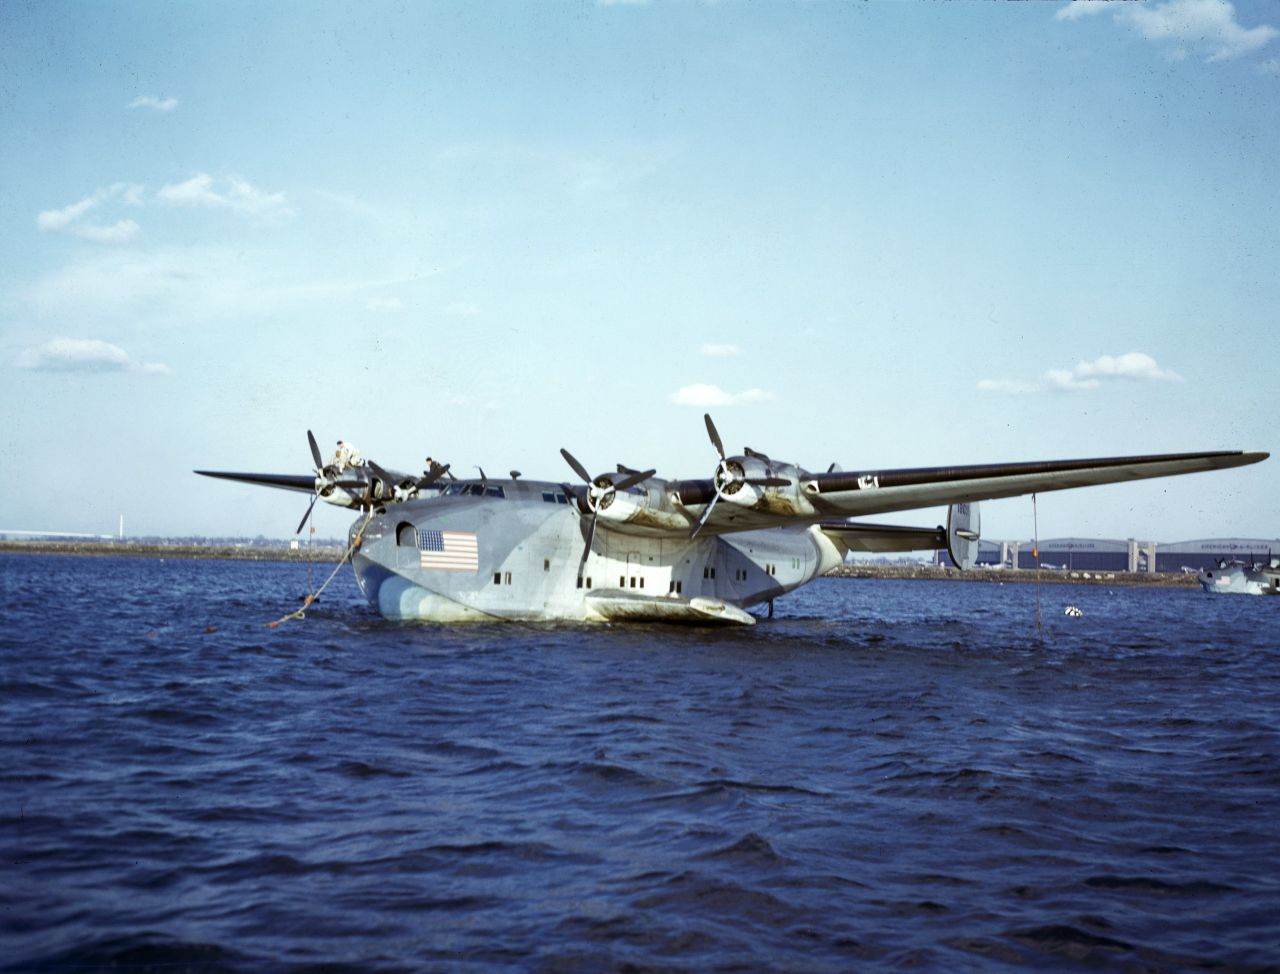 The "Jumbo" of its time, the 314 Clipper made the first scheduled trans-Atlantic flight in 1939. It held 74 passengers and cemented regular flying on long-haul routes from North America across the Pacific to Asia and across the Atlantic to Europe. Its well-appointed cabin heralded the real birth of in-flight service. 